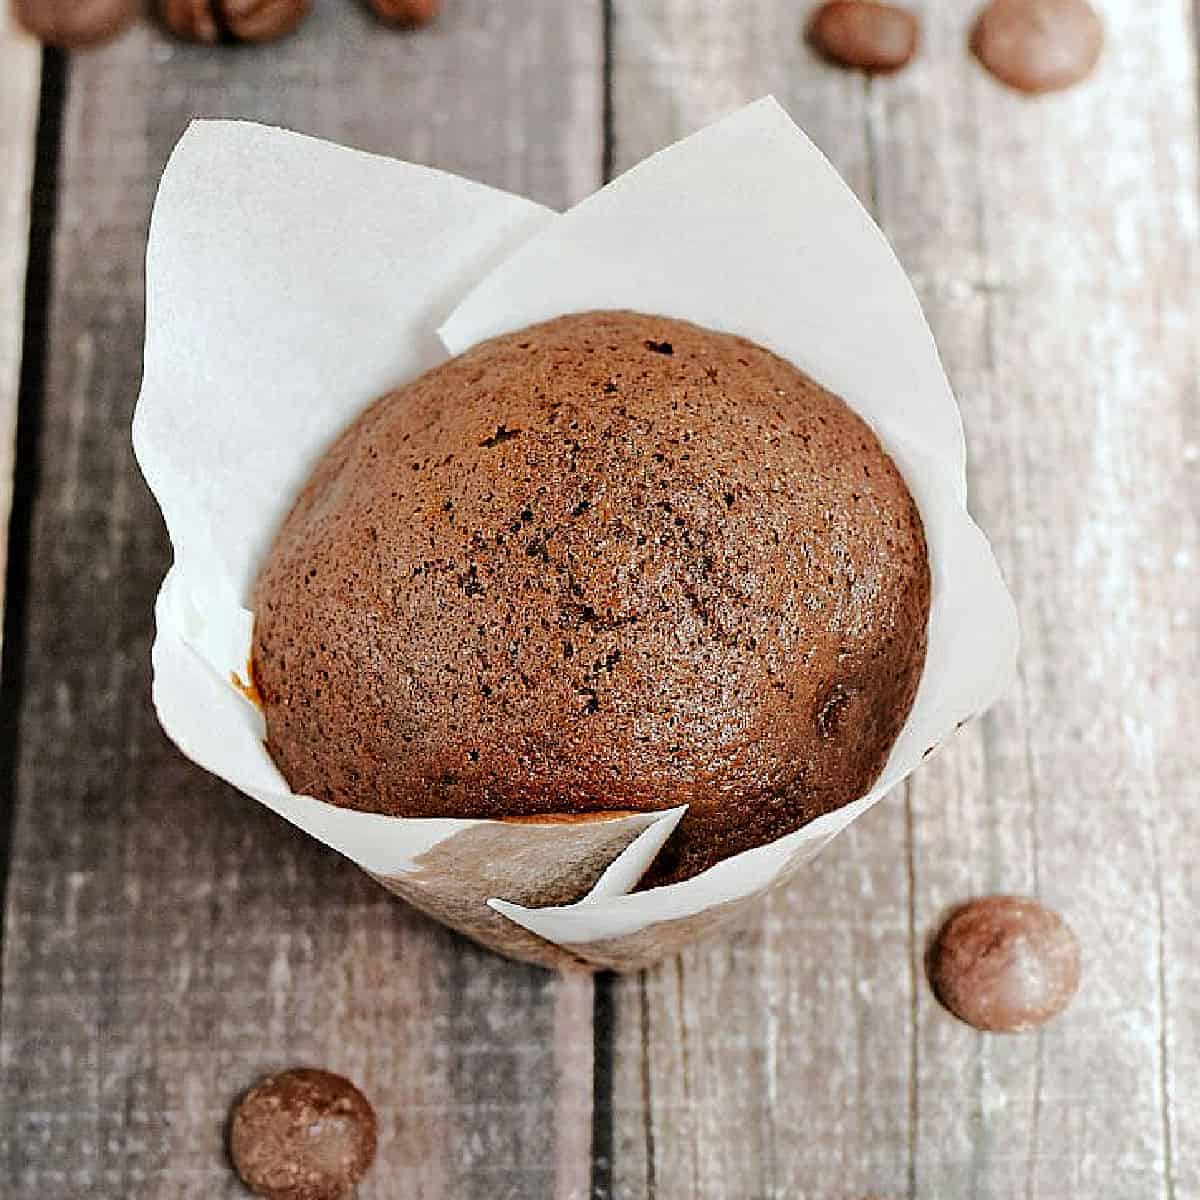 Chocolate muffin in white paper liner surrounded by coffee beans and dark chocolate chips.